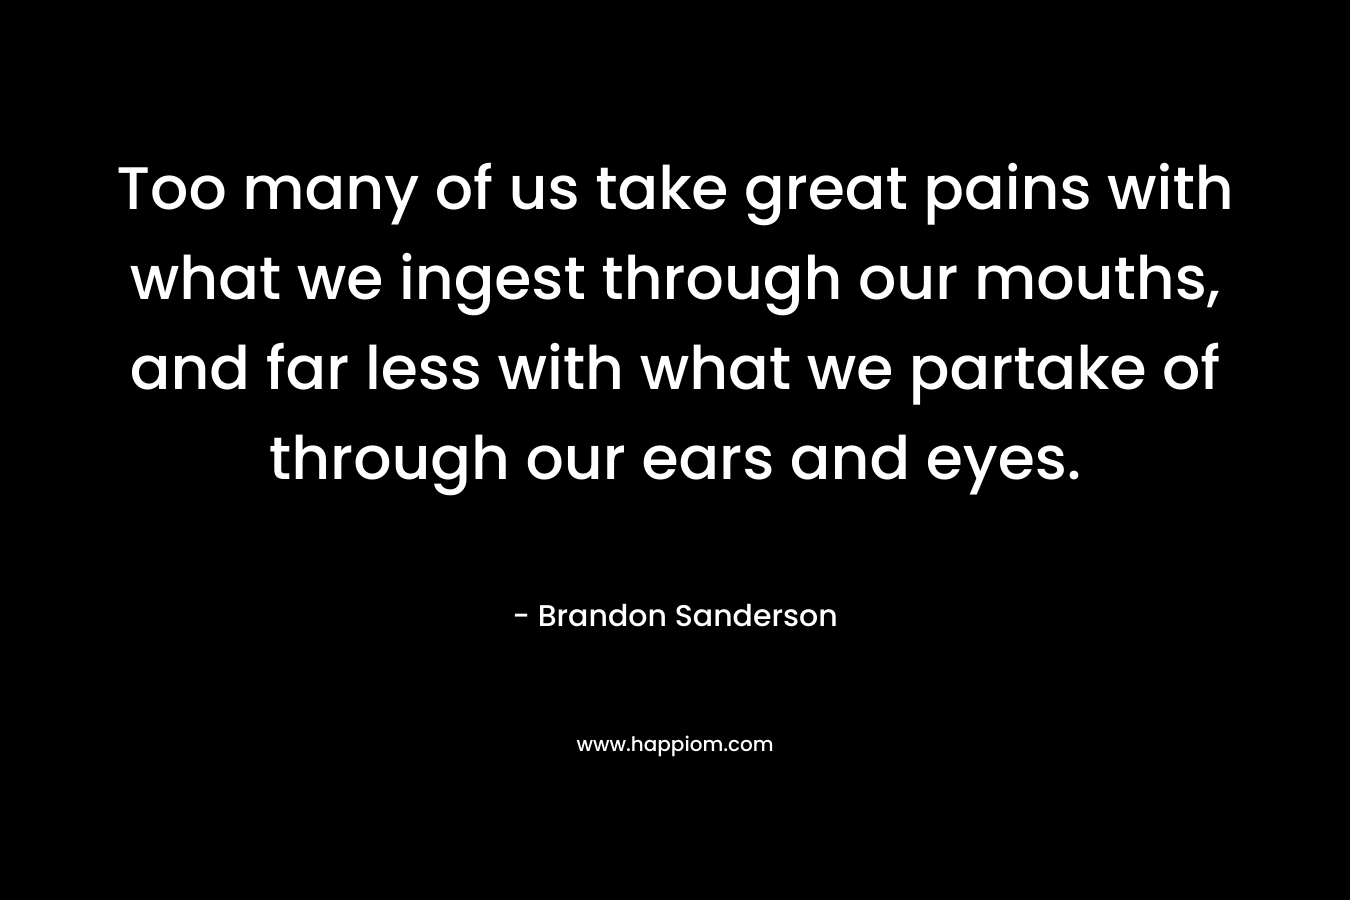 Too many of us take great pains with what we ingest through our mouths, and far less with what we partake of through our ears and eyes.